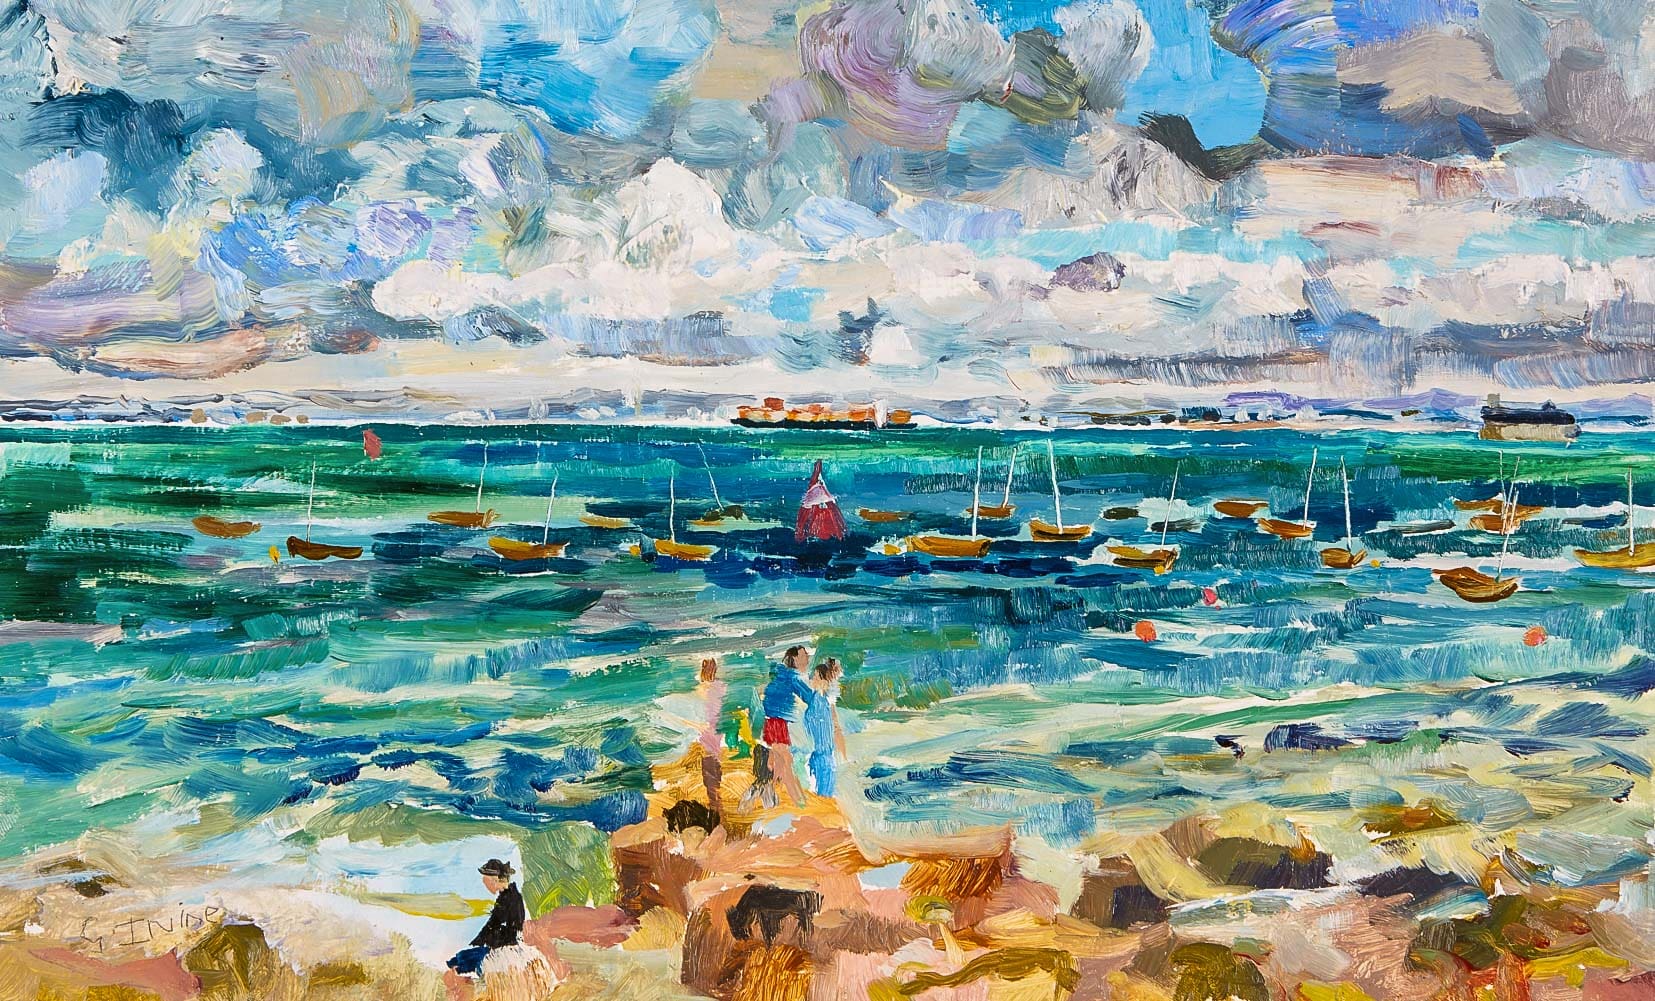 Oil painting crabbing in the isle of wight